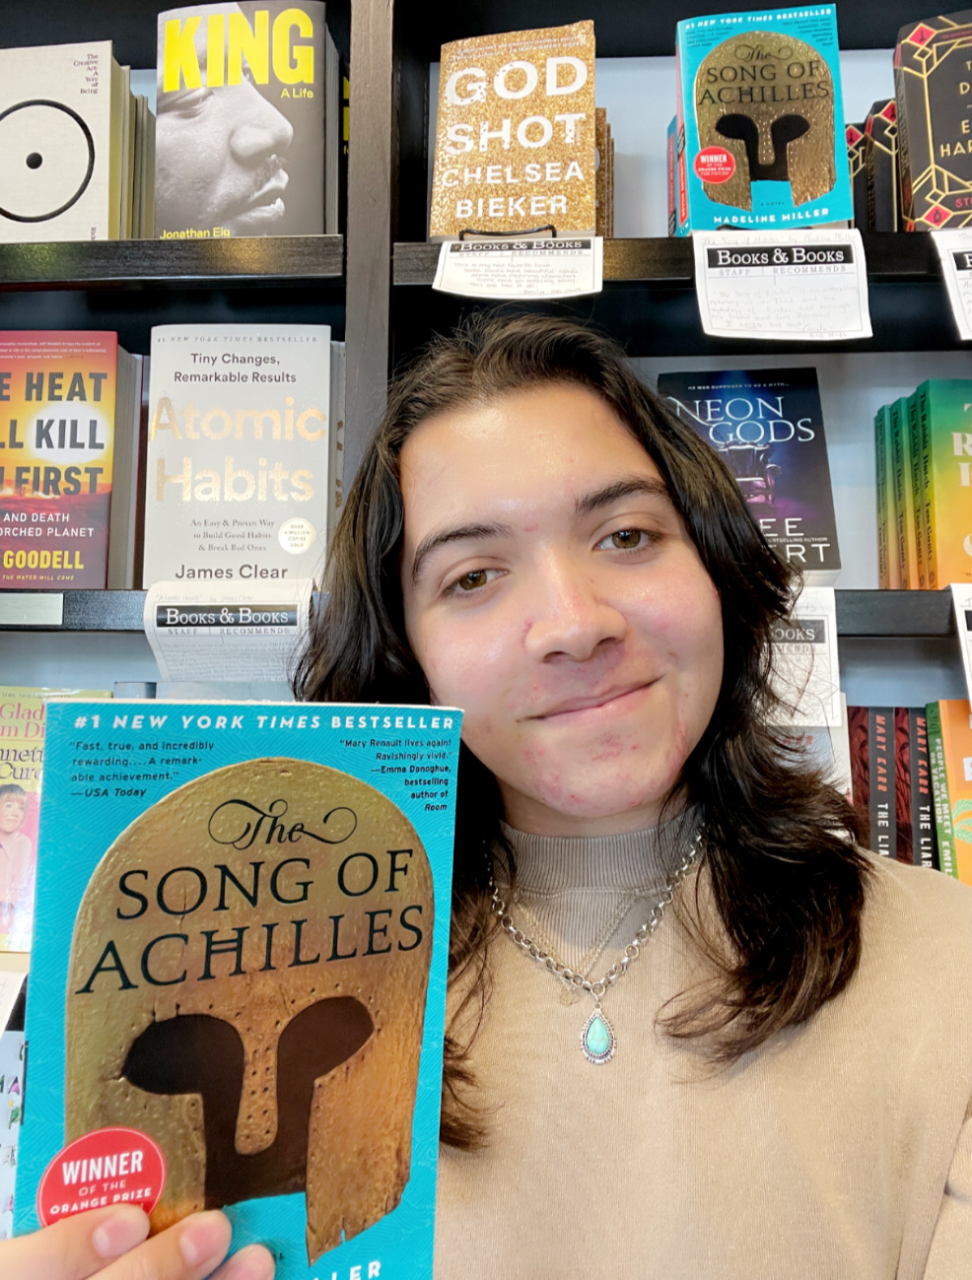 Bookseller Alexander holding The Song of Achilles by Madeline Miller